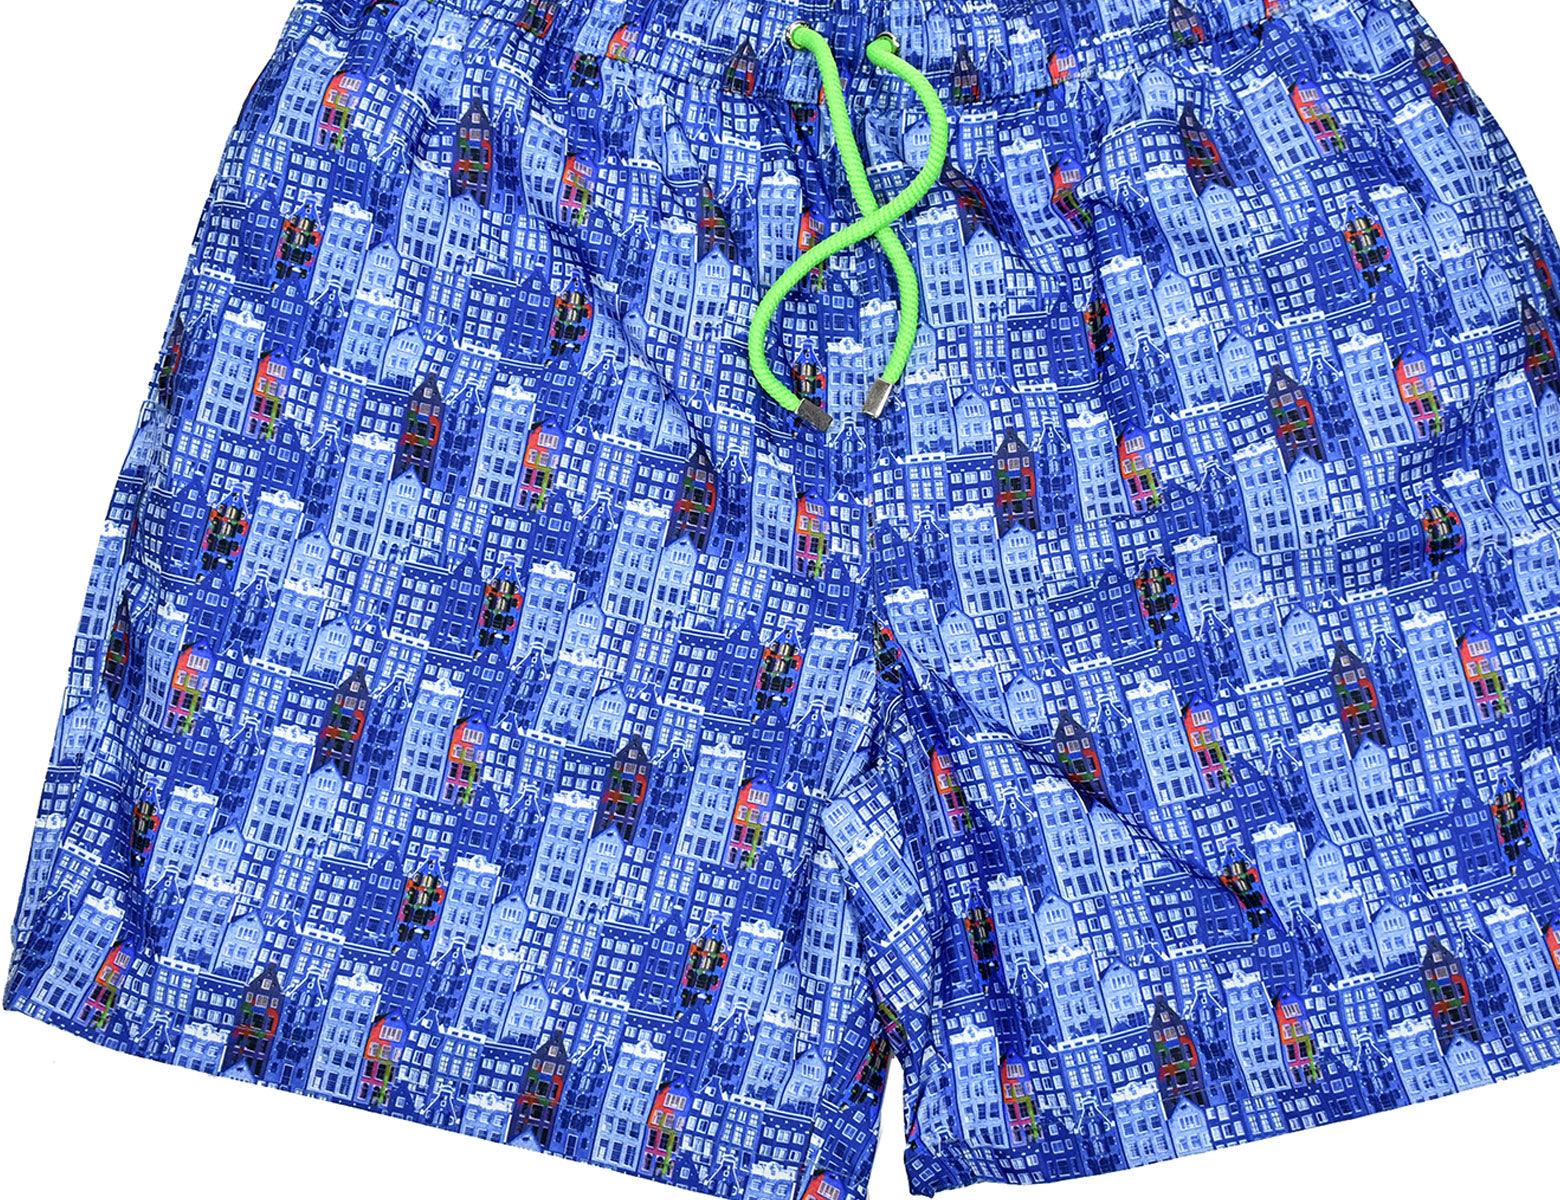 Our cool microfiber fabric swim shorts feature a unique pattern sure to set your image at the pool or beach.  Classic quick dry fabric. Elastic stretch waist band with fashion draw strings. Side slash pockets and back pocket. Mesh lining. Modern fit, order up one size if between sizes. Buildings print swim suit, by Marcello Sport.